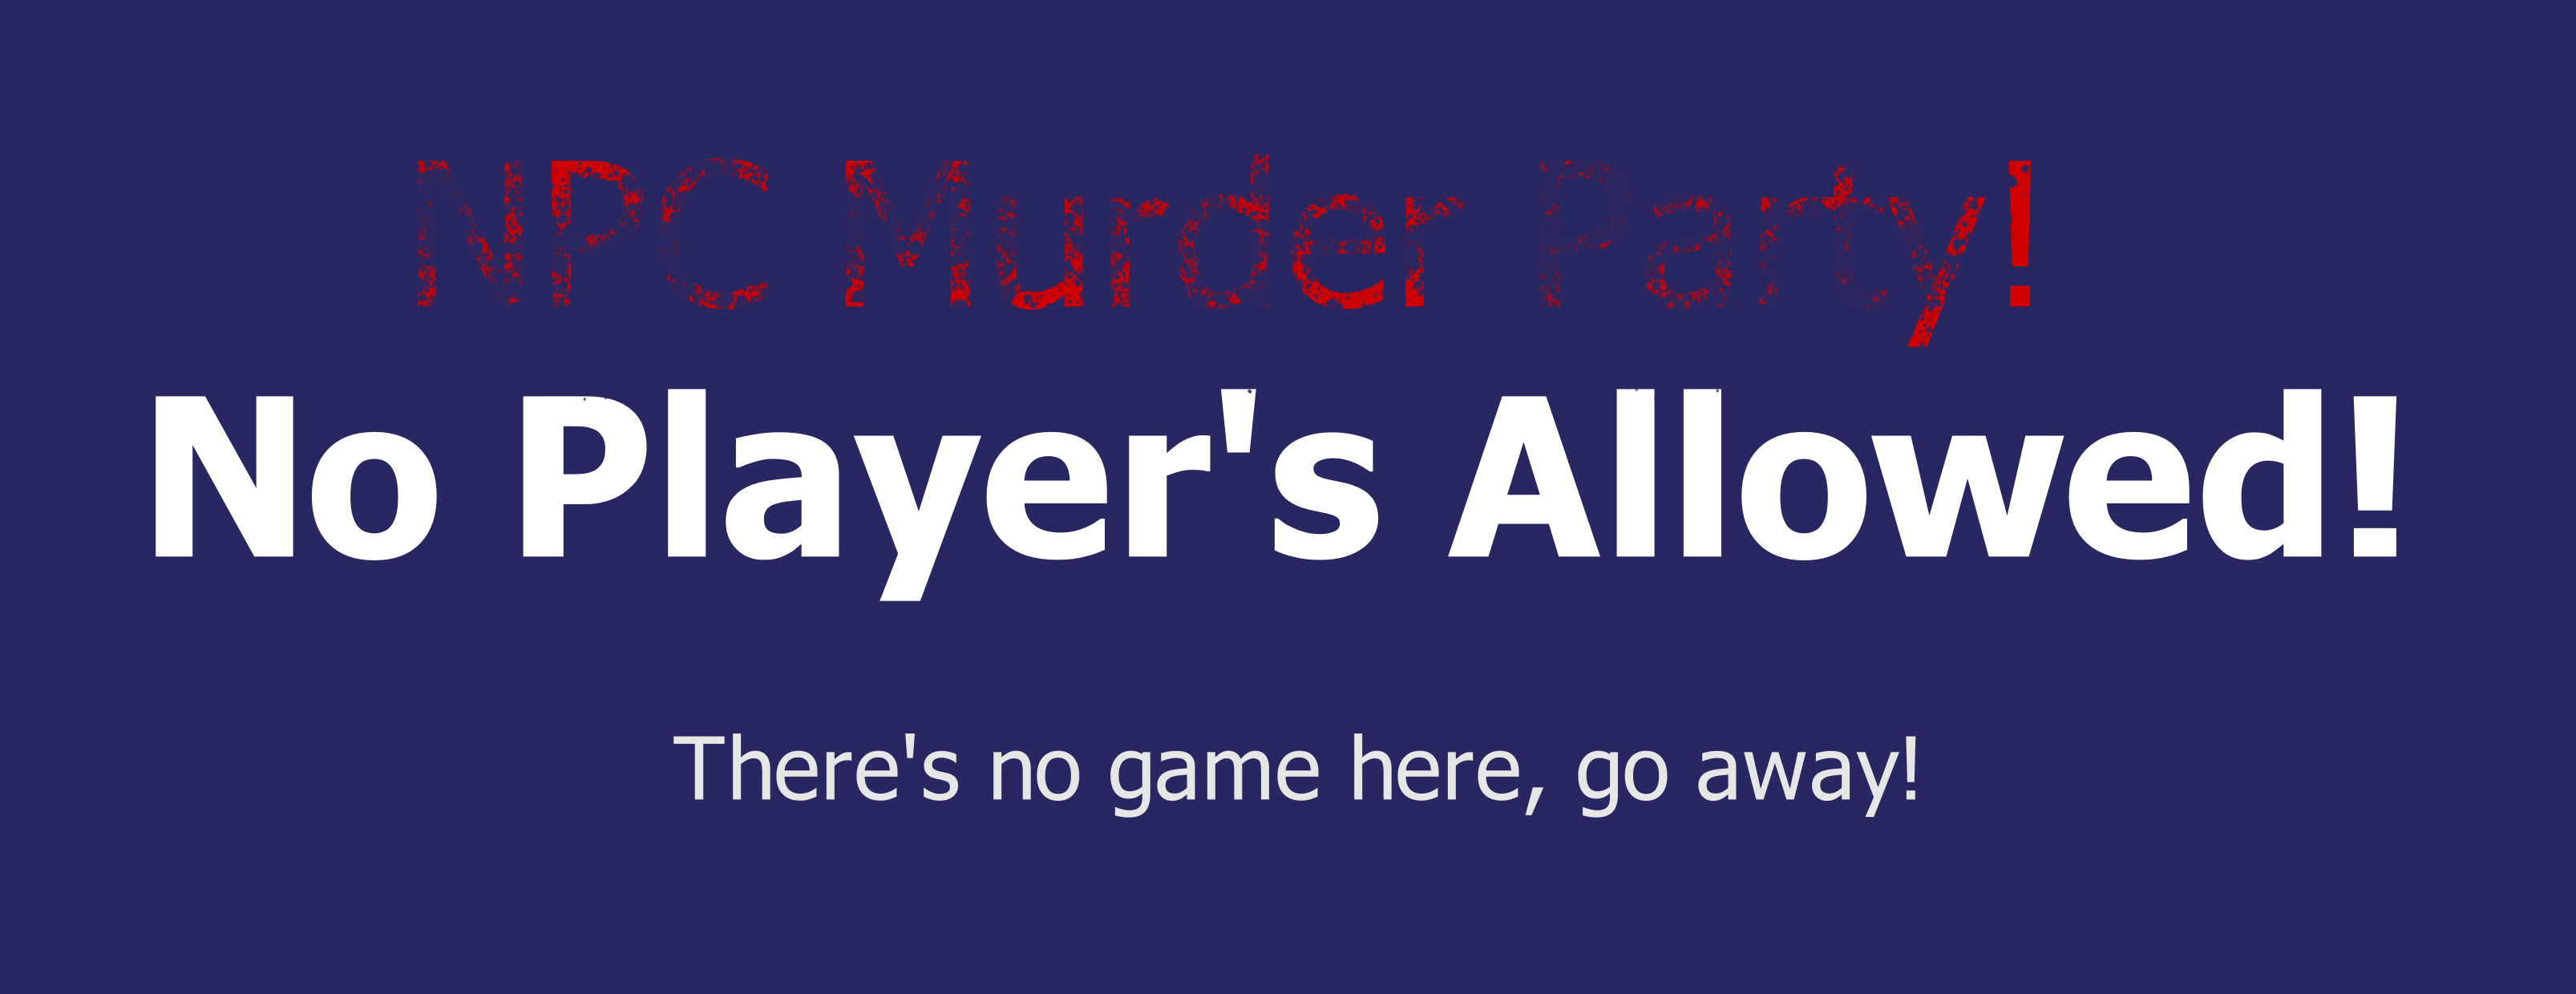 No Player's Allowed! There's no game here, go away!